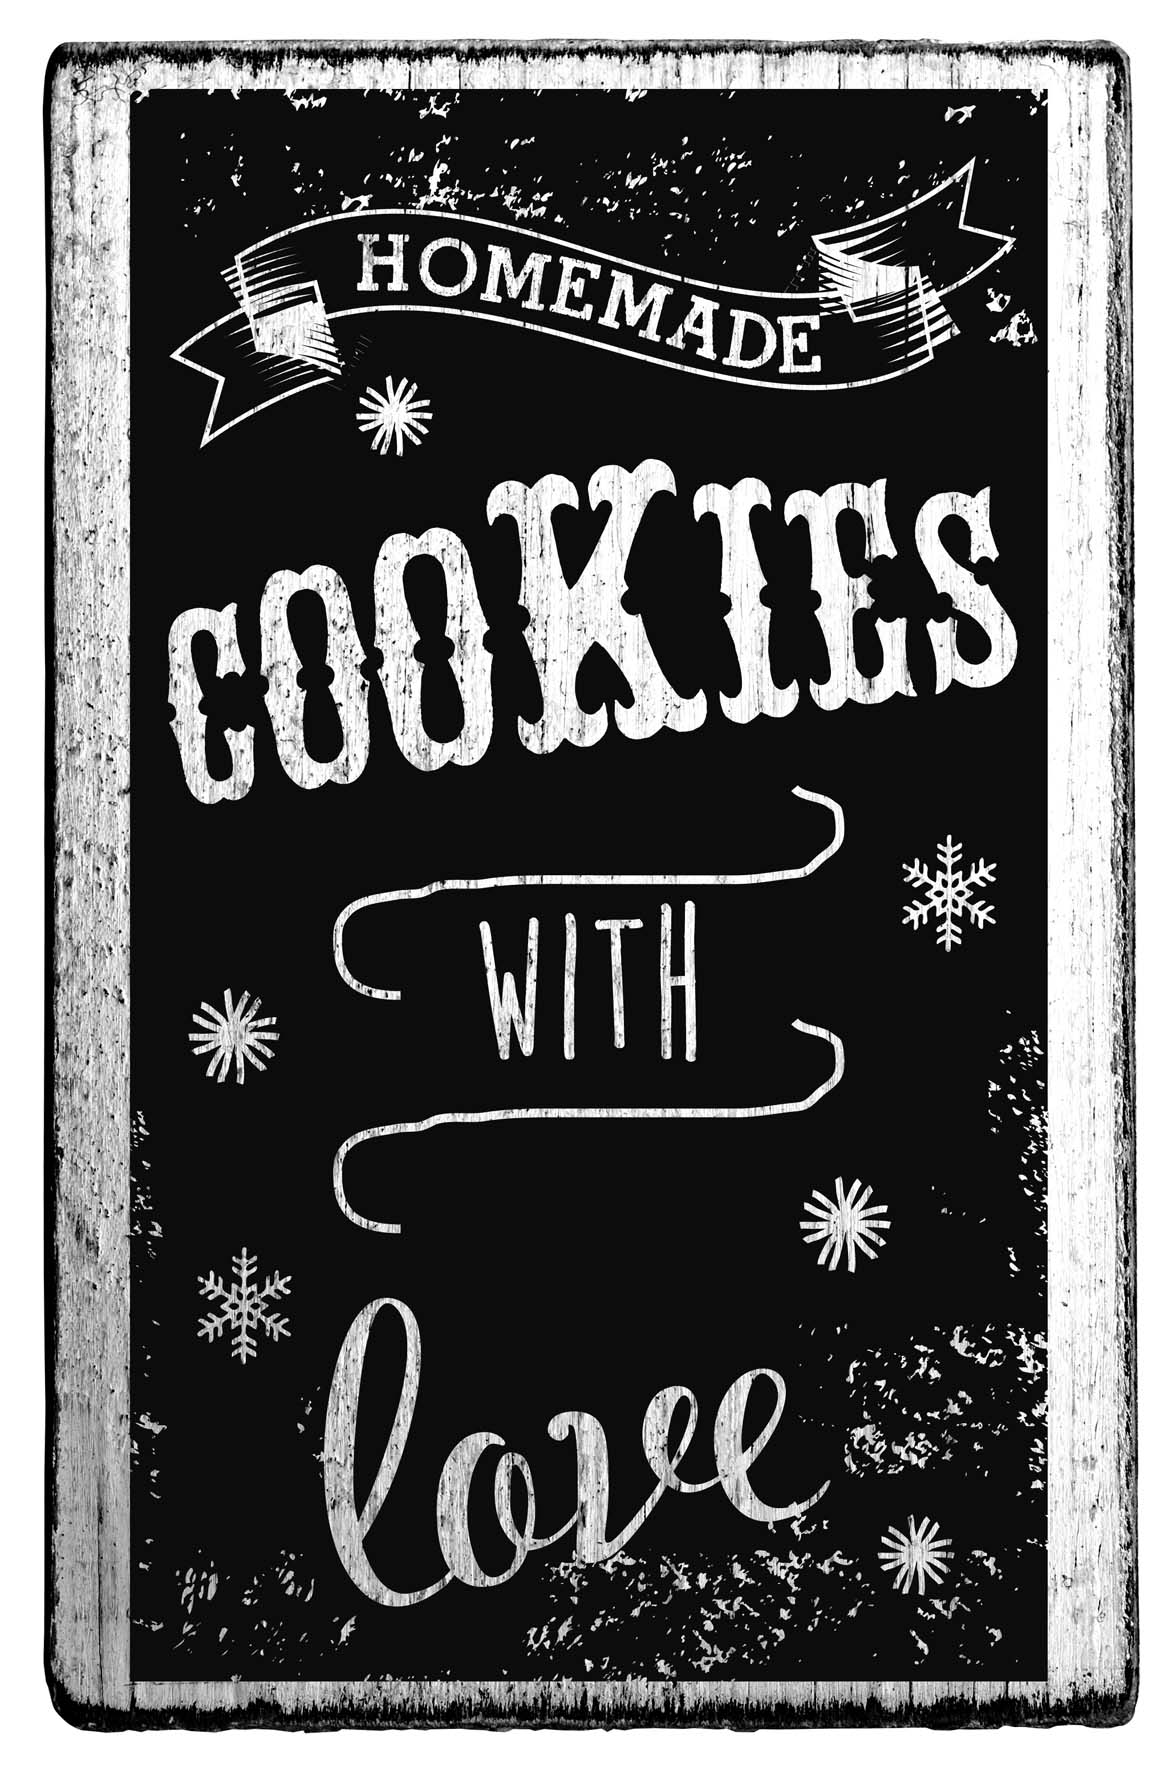 Vintage - Homemade Cookies with love - V-01036